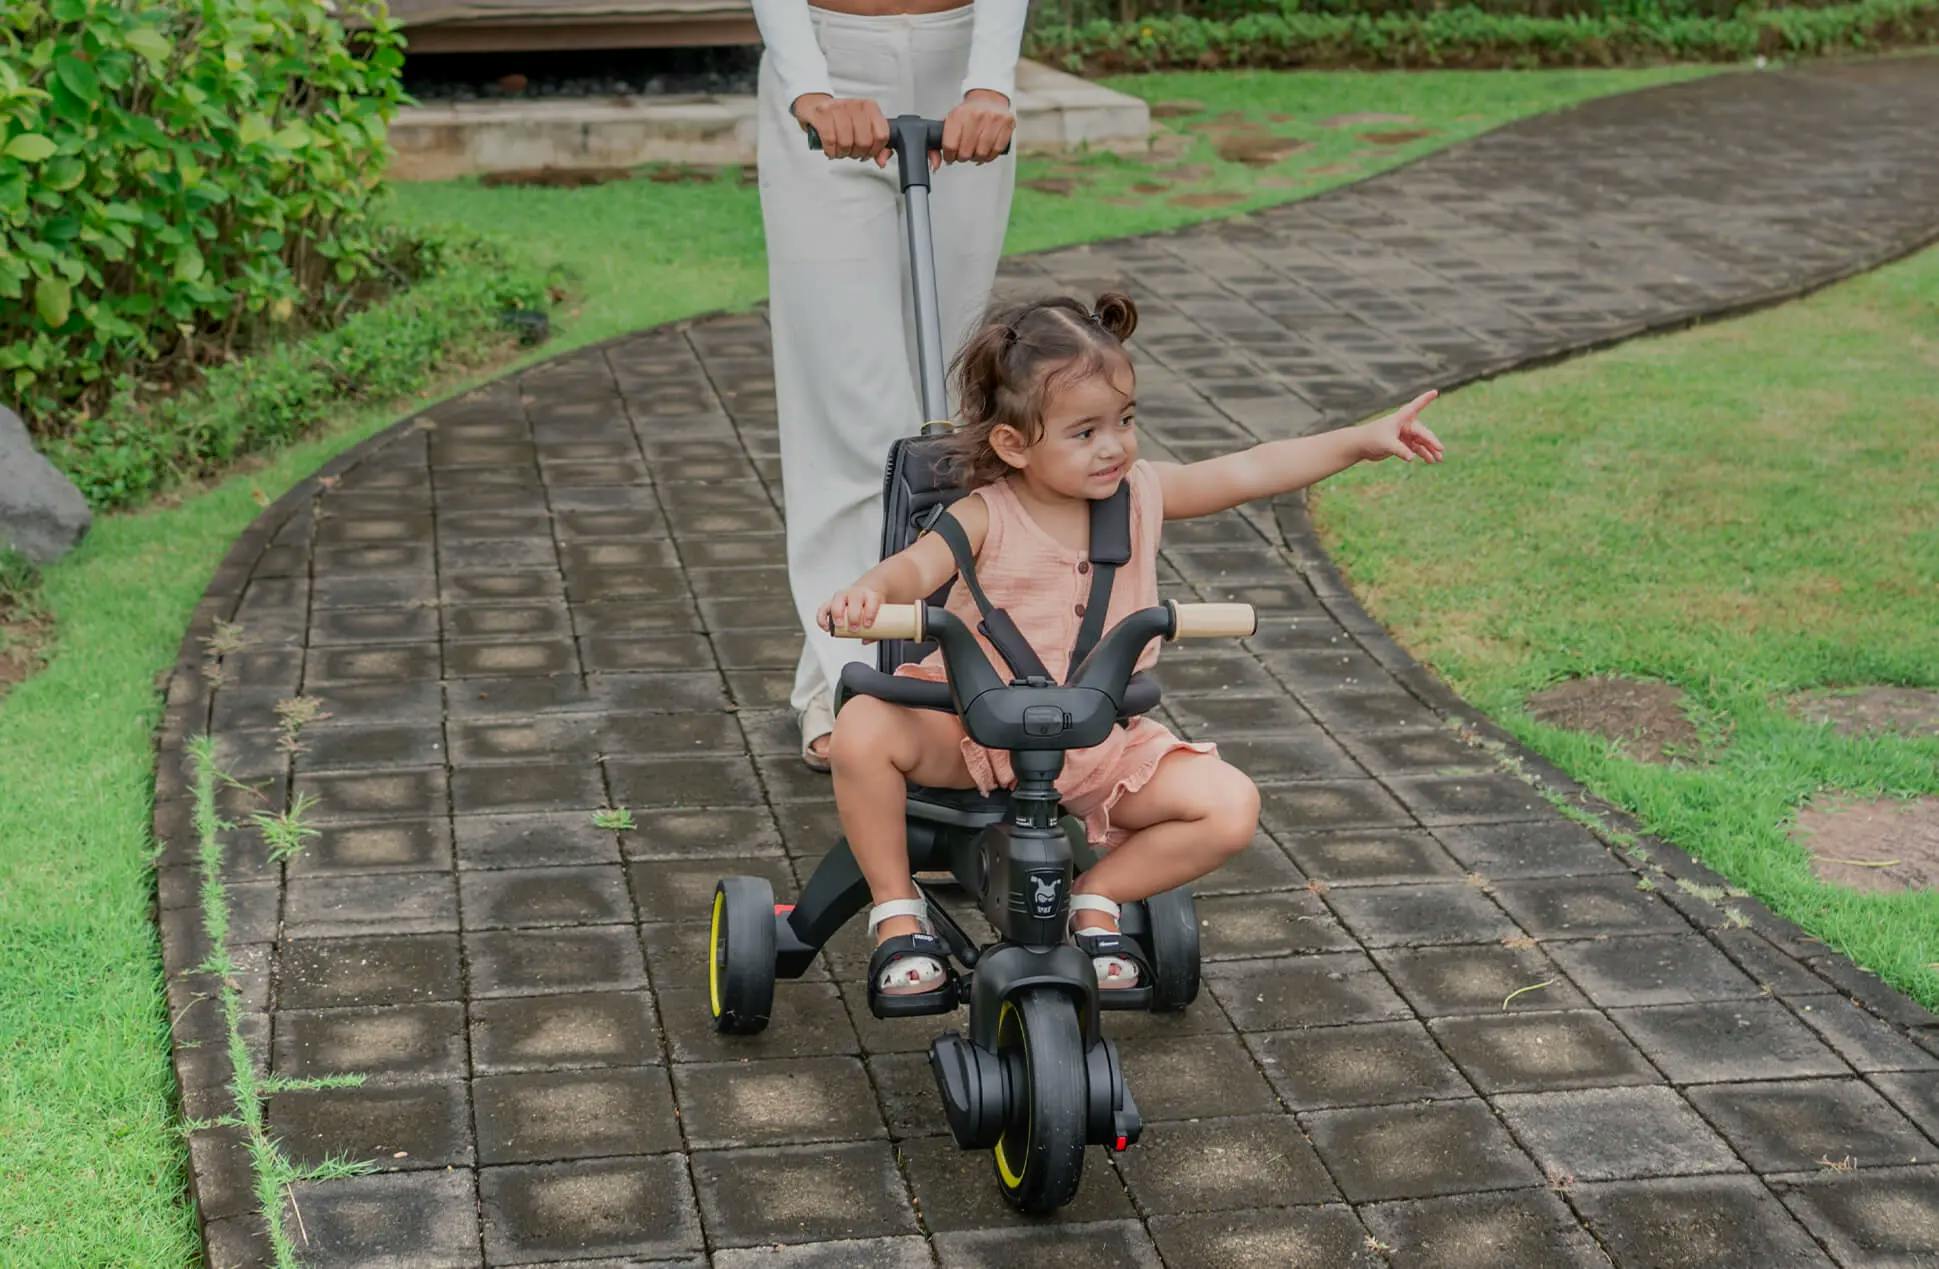 Toddler toys that boost mobility